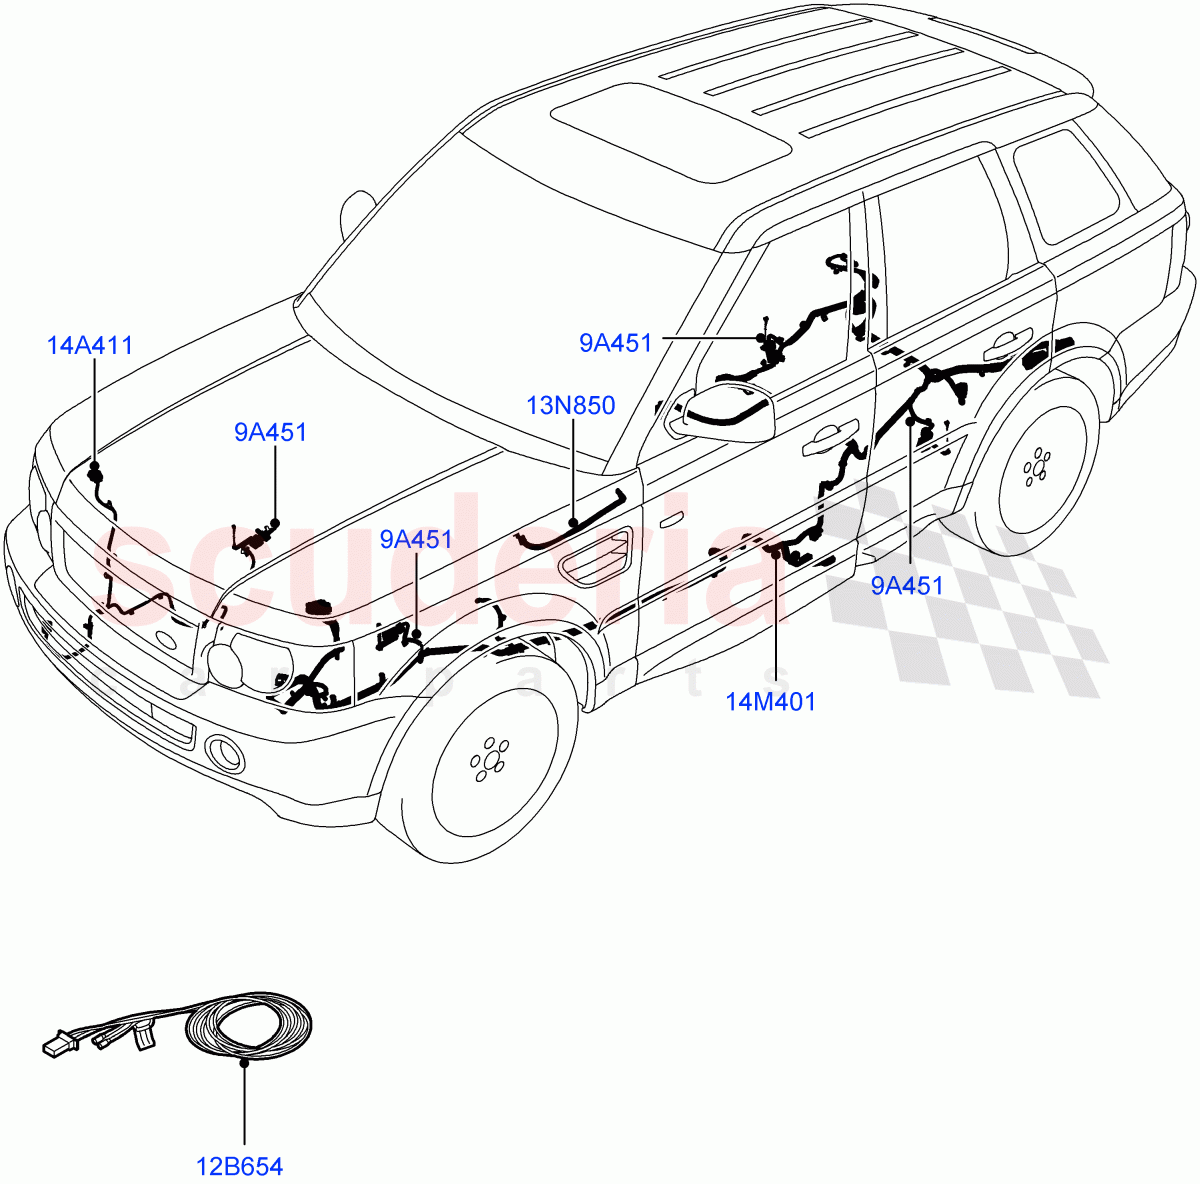 Electrical Wiring - Chassis((V)TO9A999999) of Land Rover Land Rover Range Rover Sport (2005-2009) [3.6 V8 32V DOHC EFI Diesel]